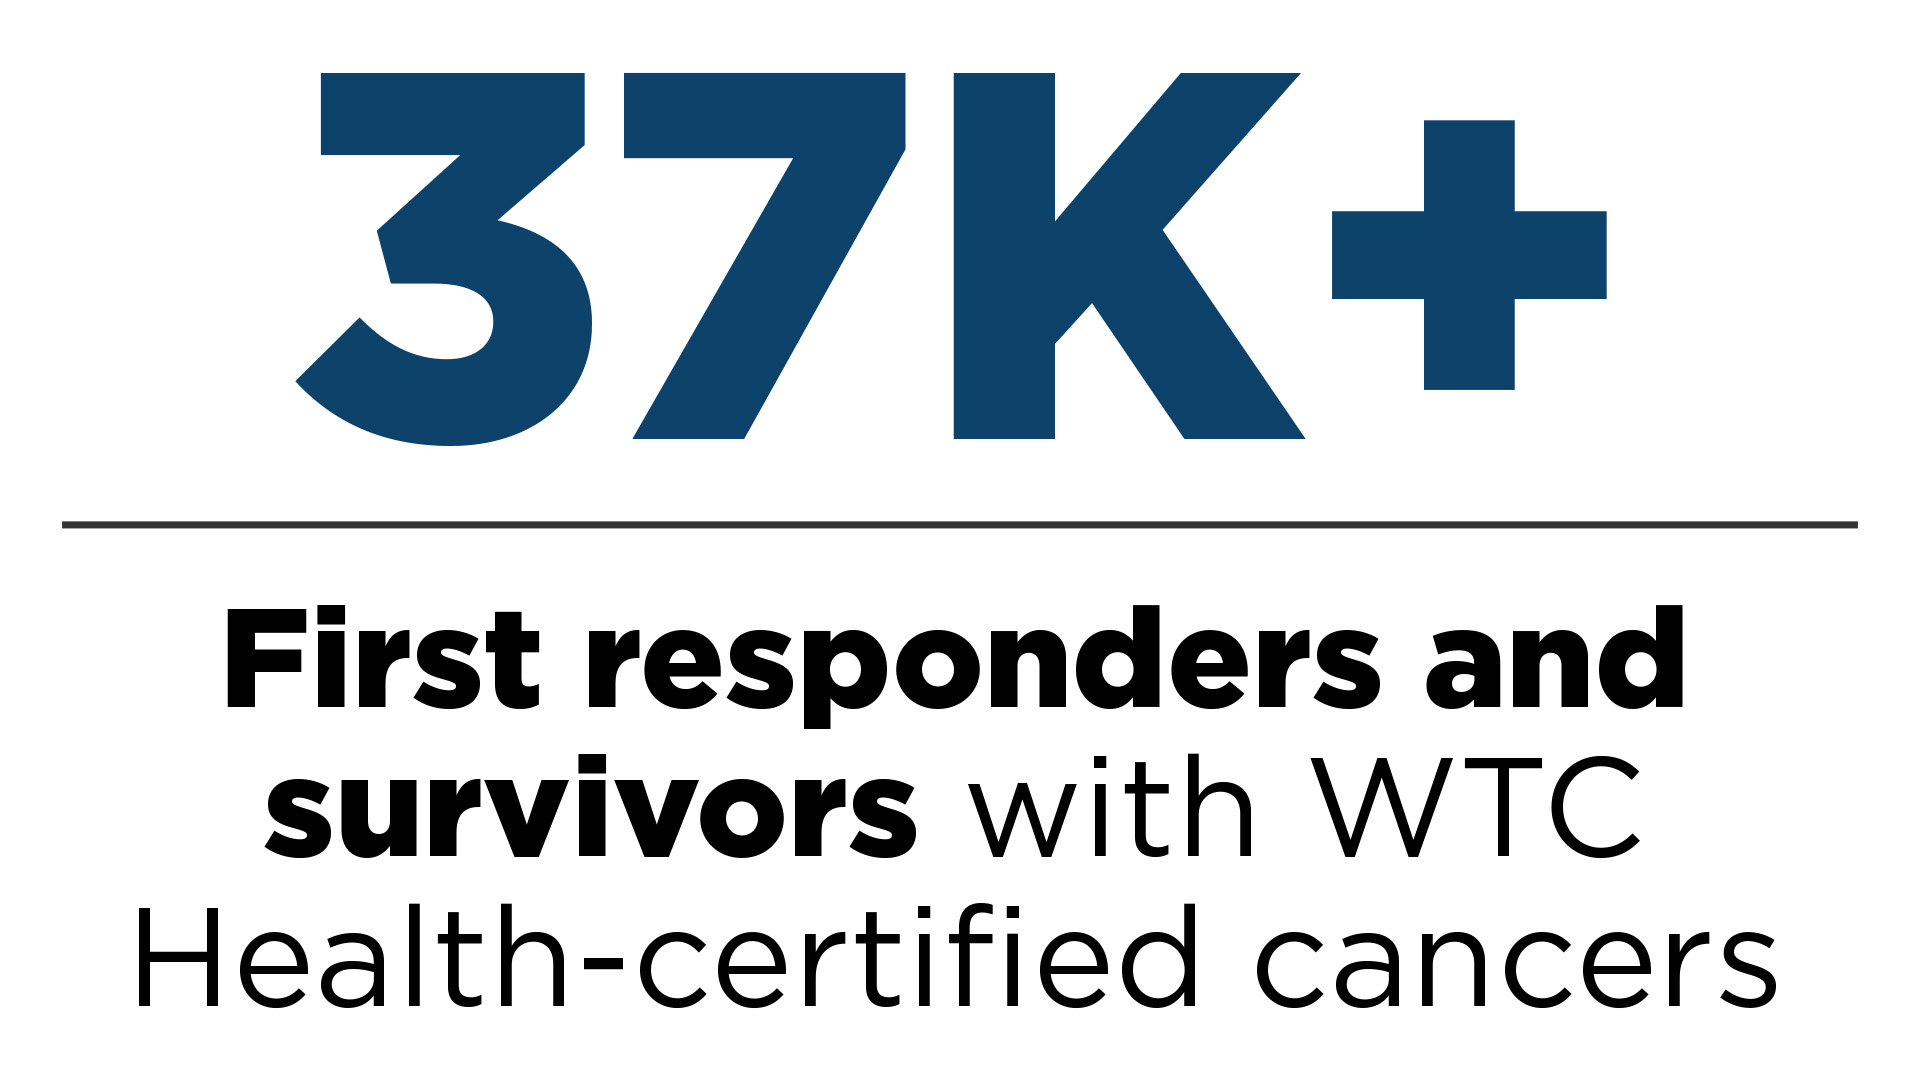 Infographic that reads "More than 37,000 first responders and survivors with WTC Health-certified cancers"